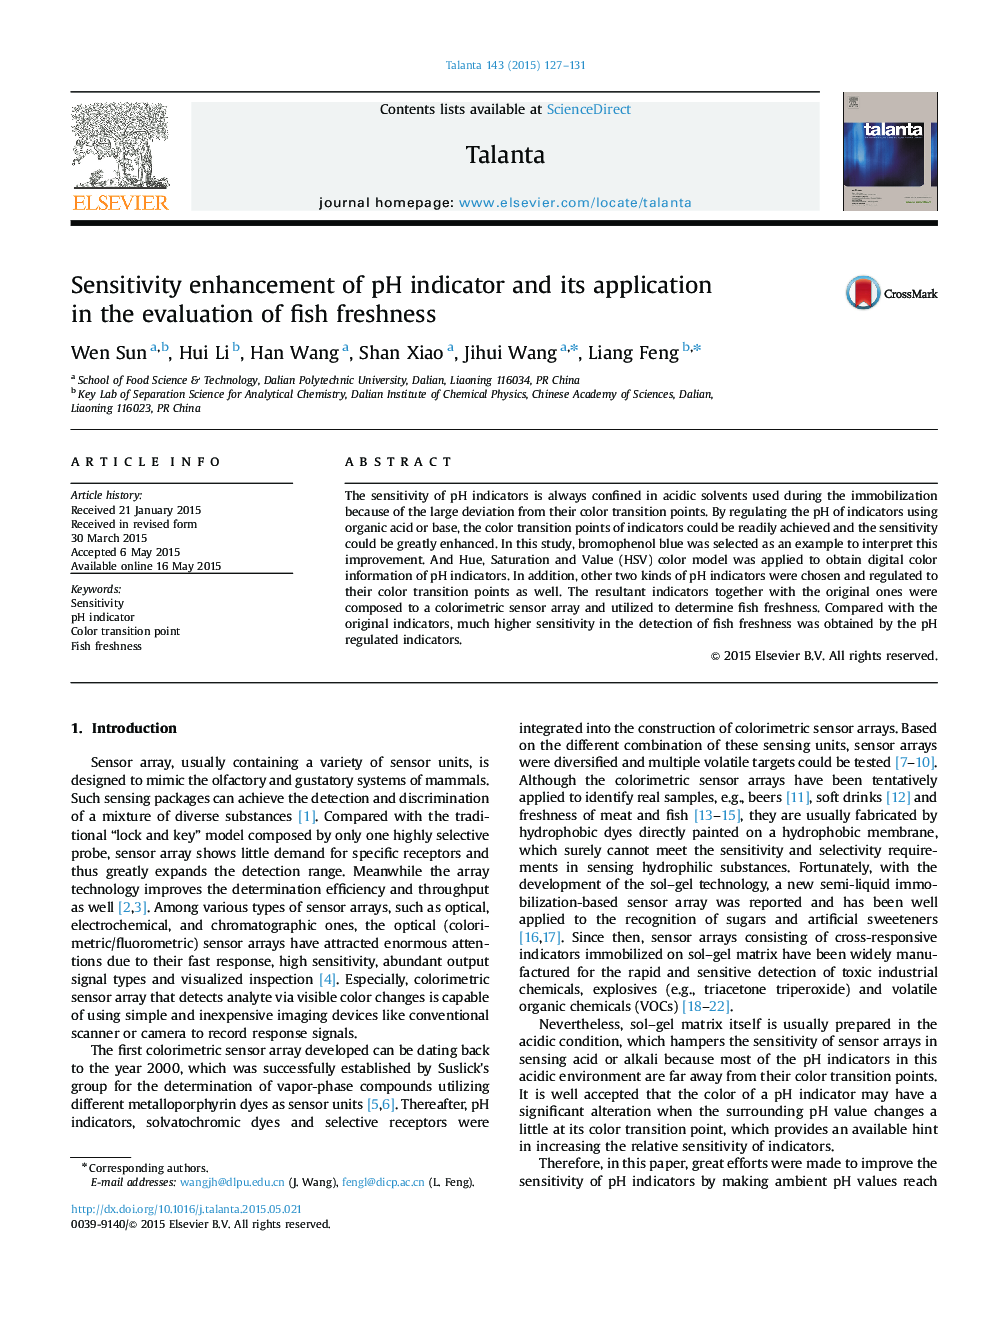 Sensitivity enhancement of pH indicator and its application in the evaluation of fish freshness